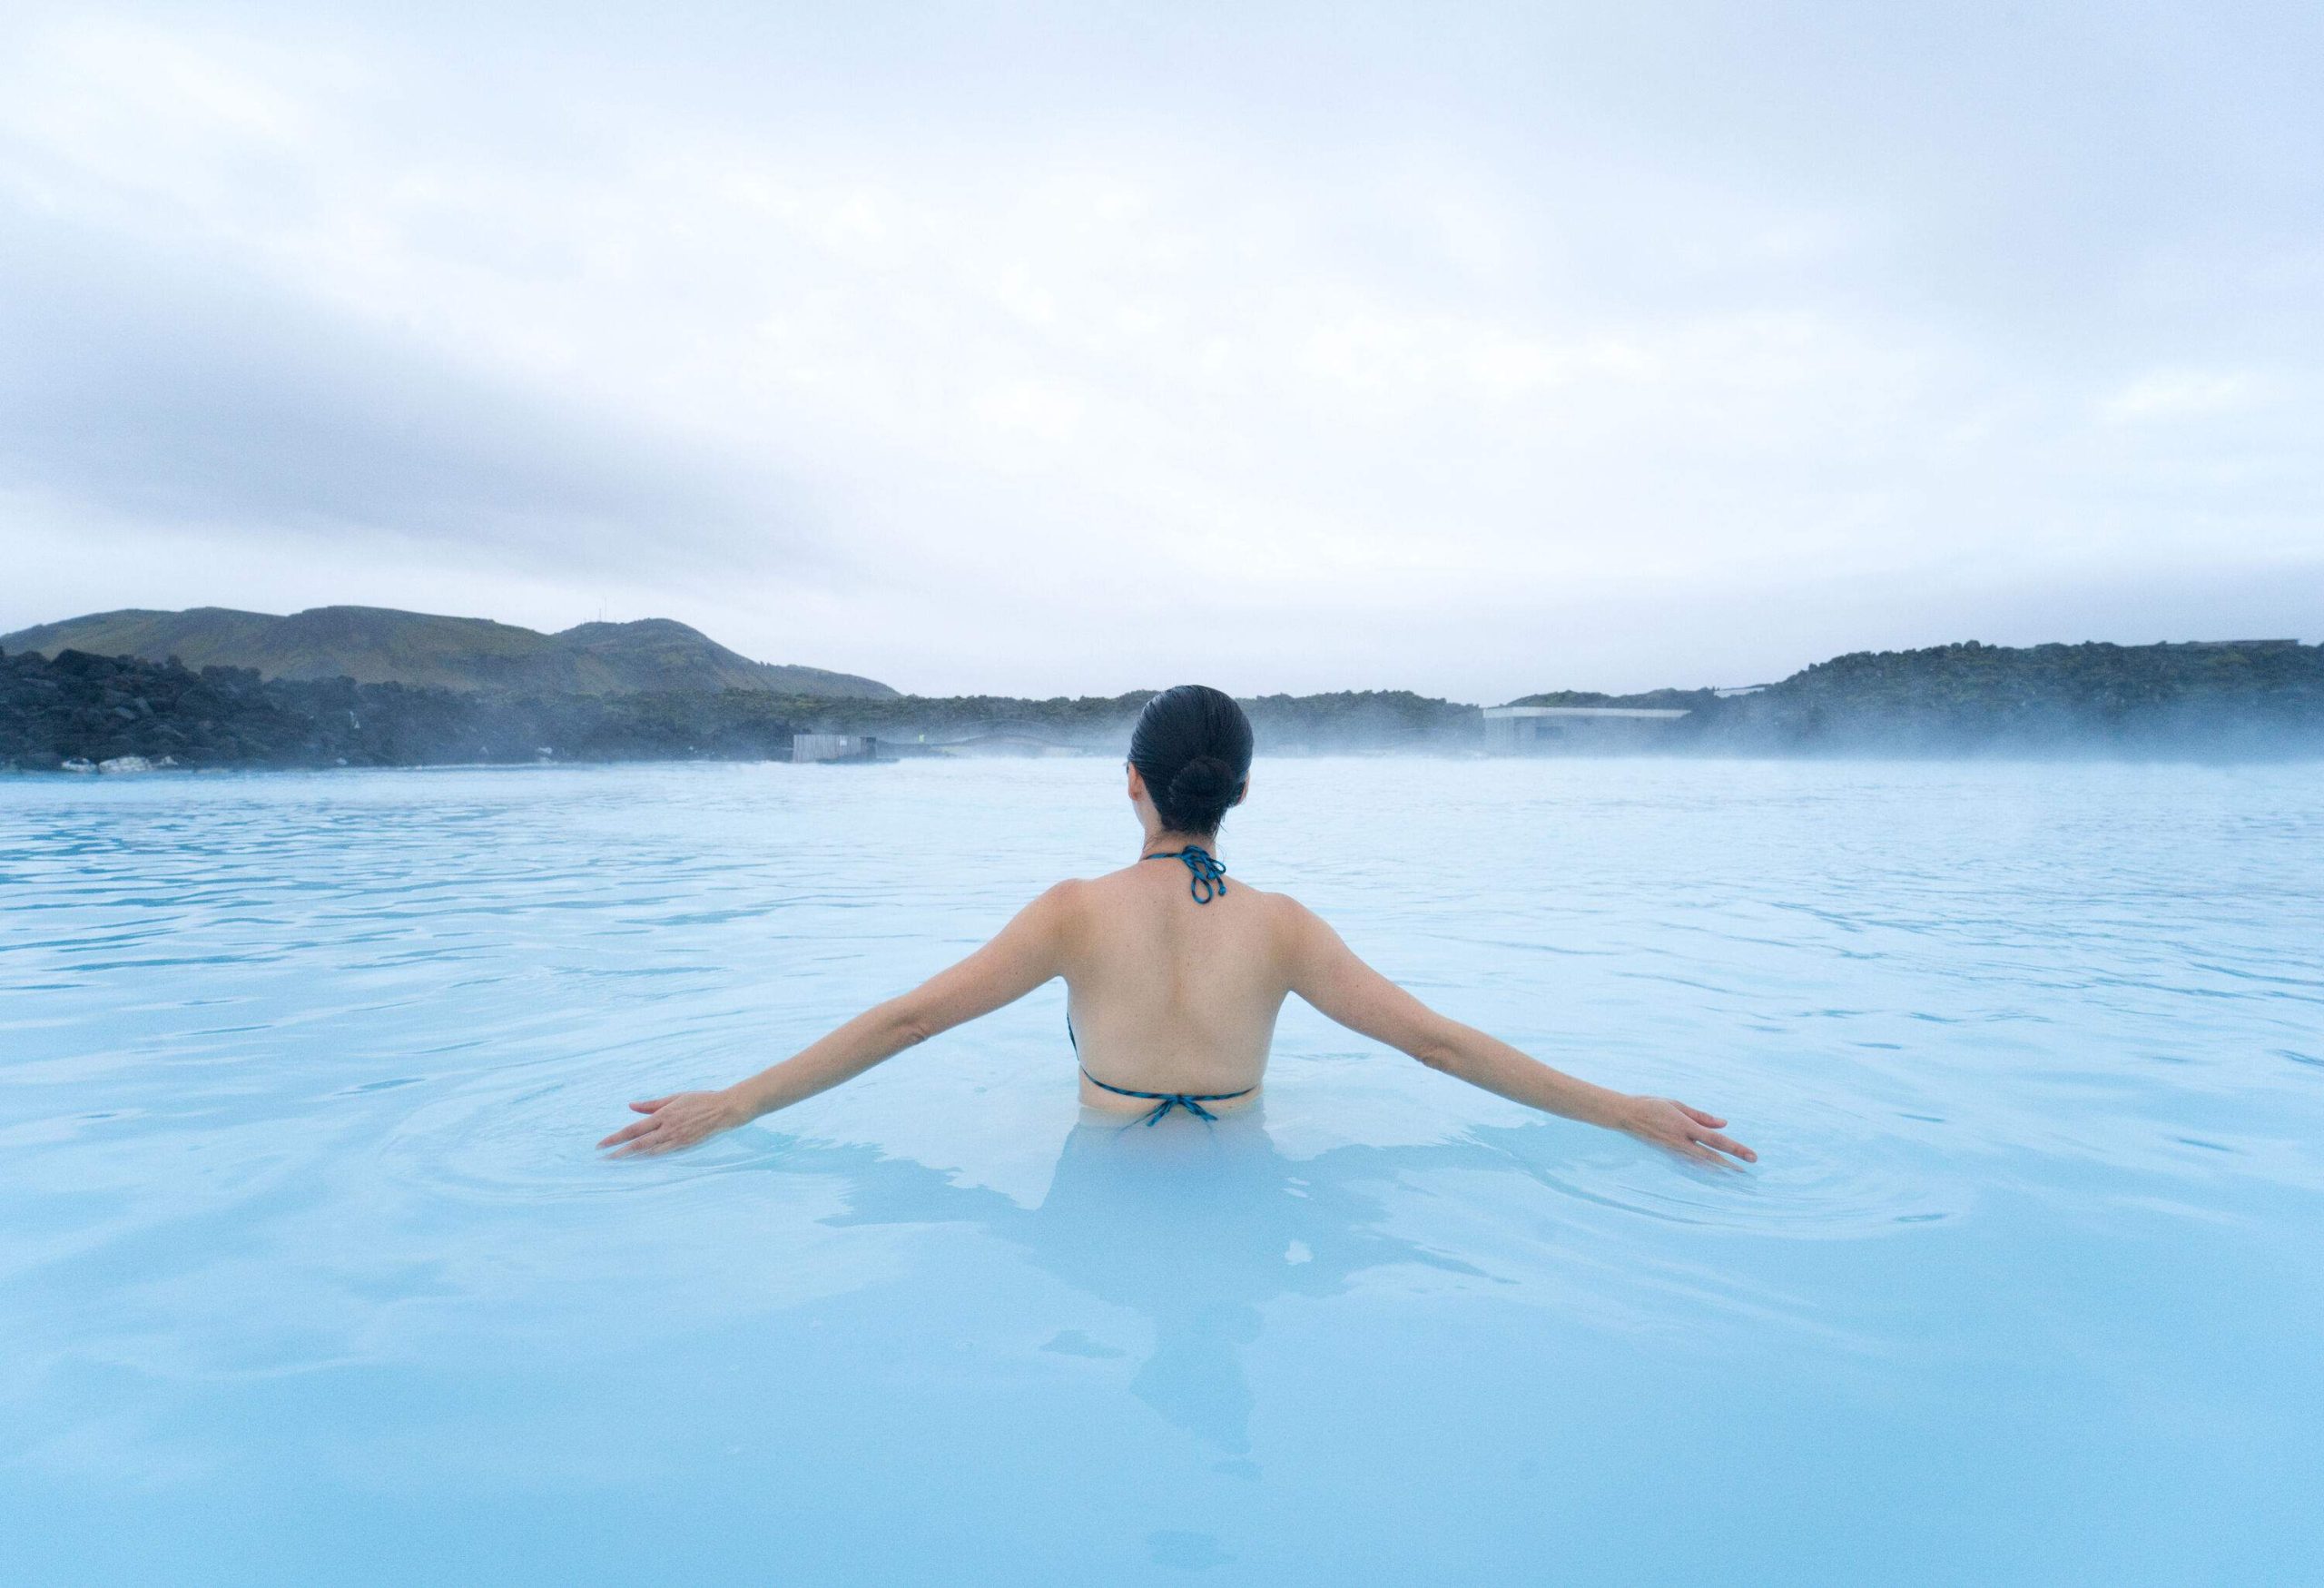 A woman in a bathing suit dips into the milky blue waters of a steaming lagoon.